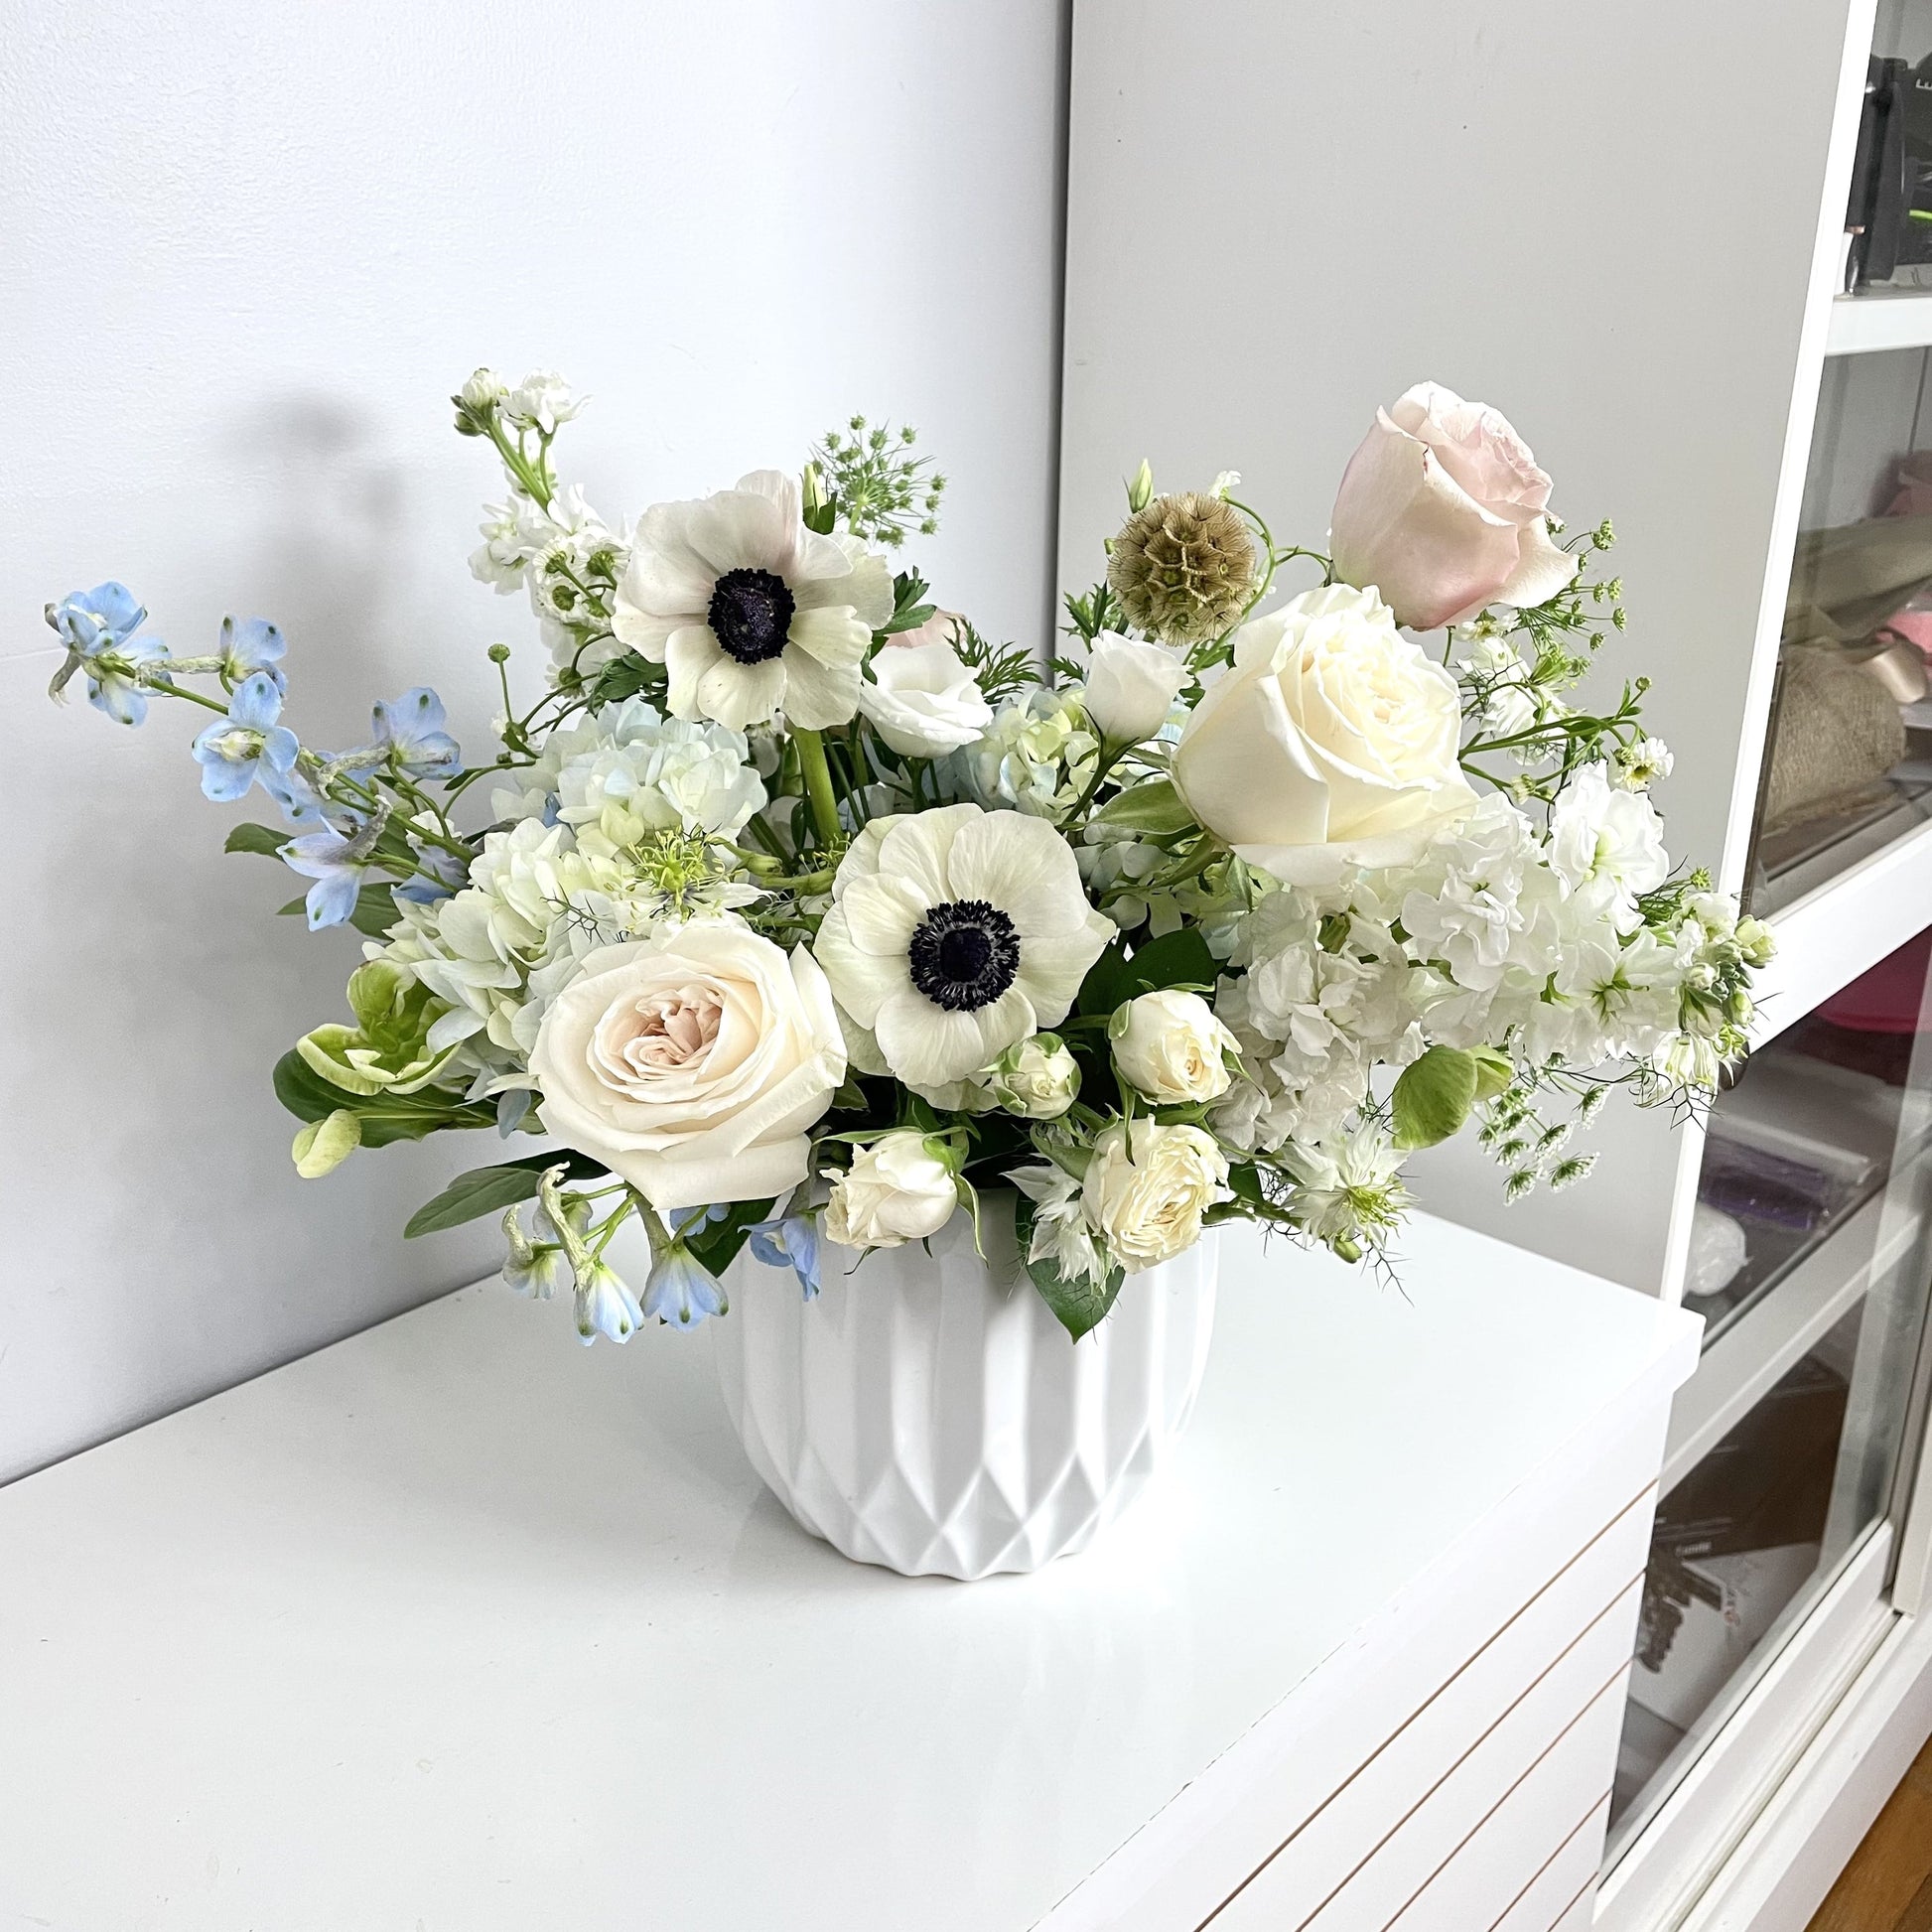 Luxury cape style flower arrangement in white vase featuring anemone, delphinium, hydrangea, lizianthus, roses and other 